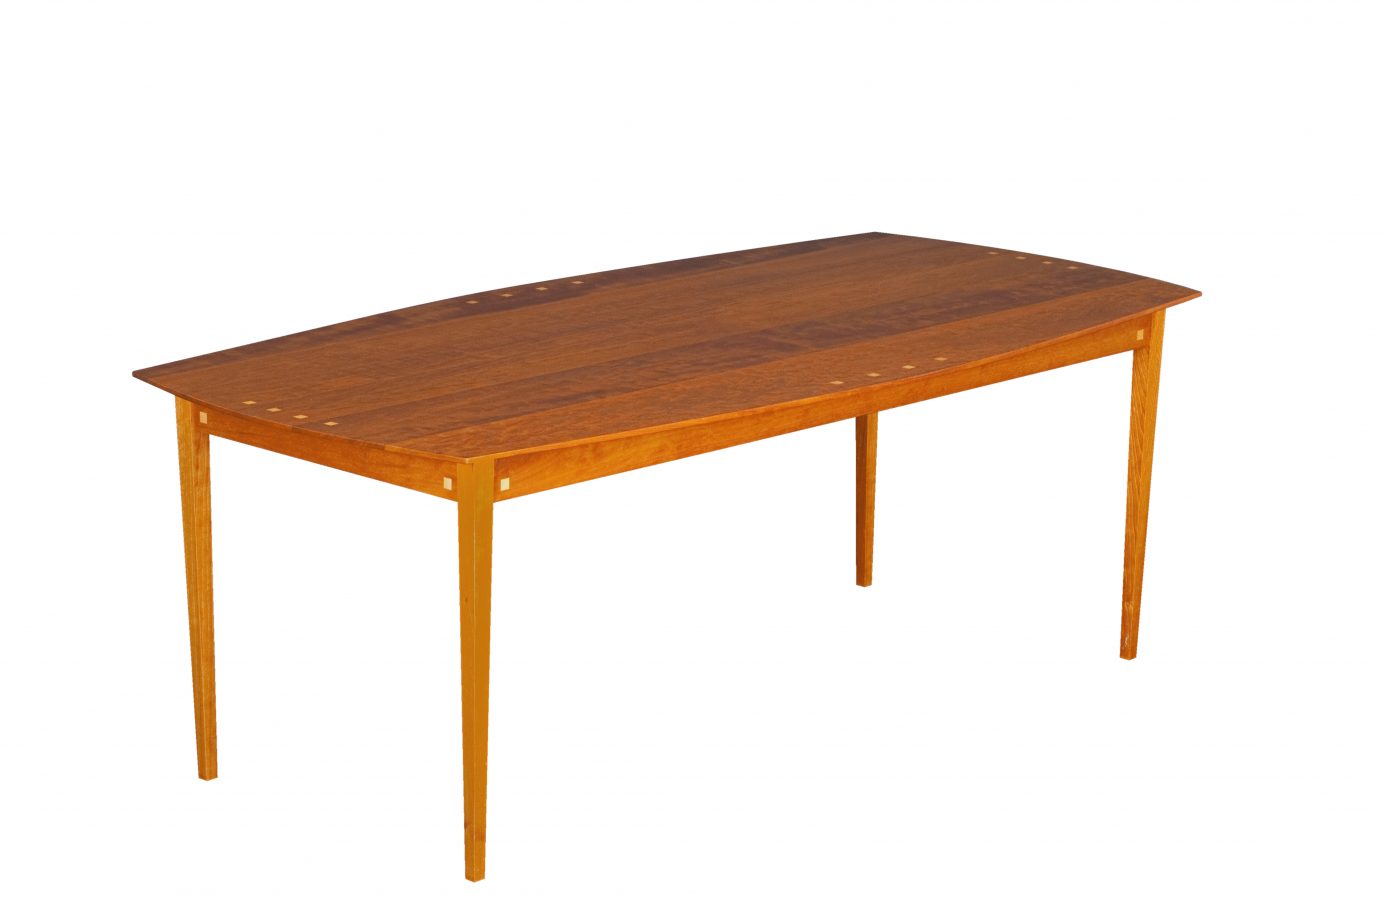 York Dining Table, shown in cherry.